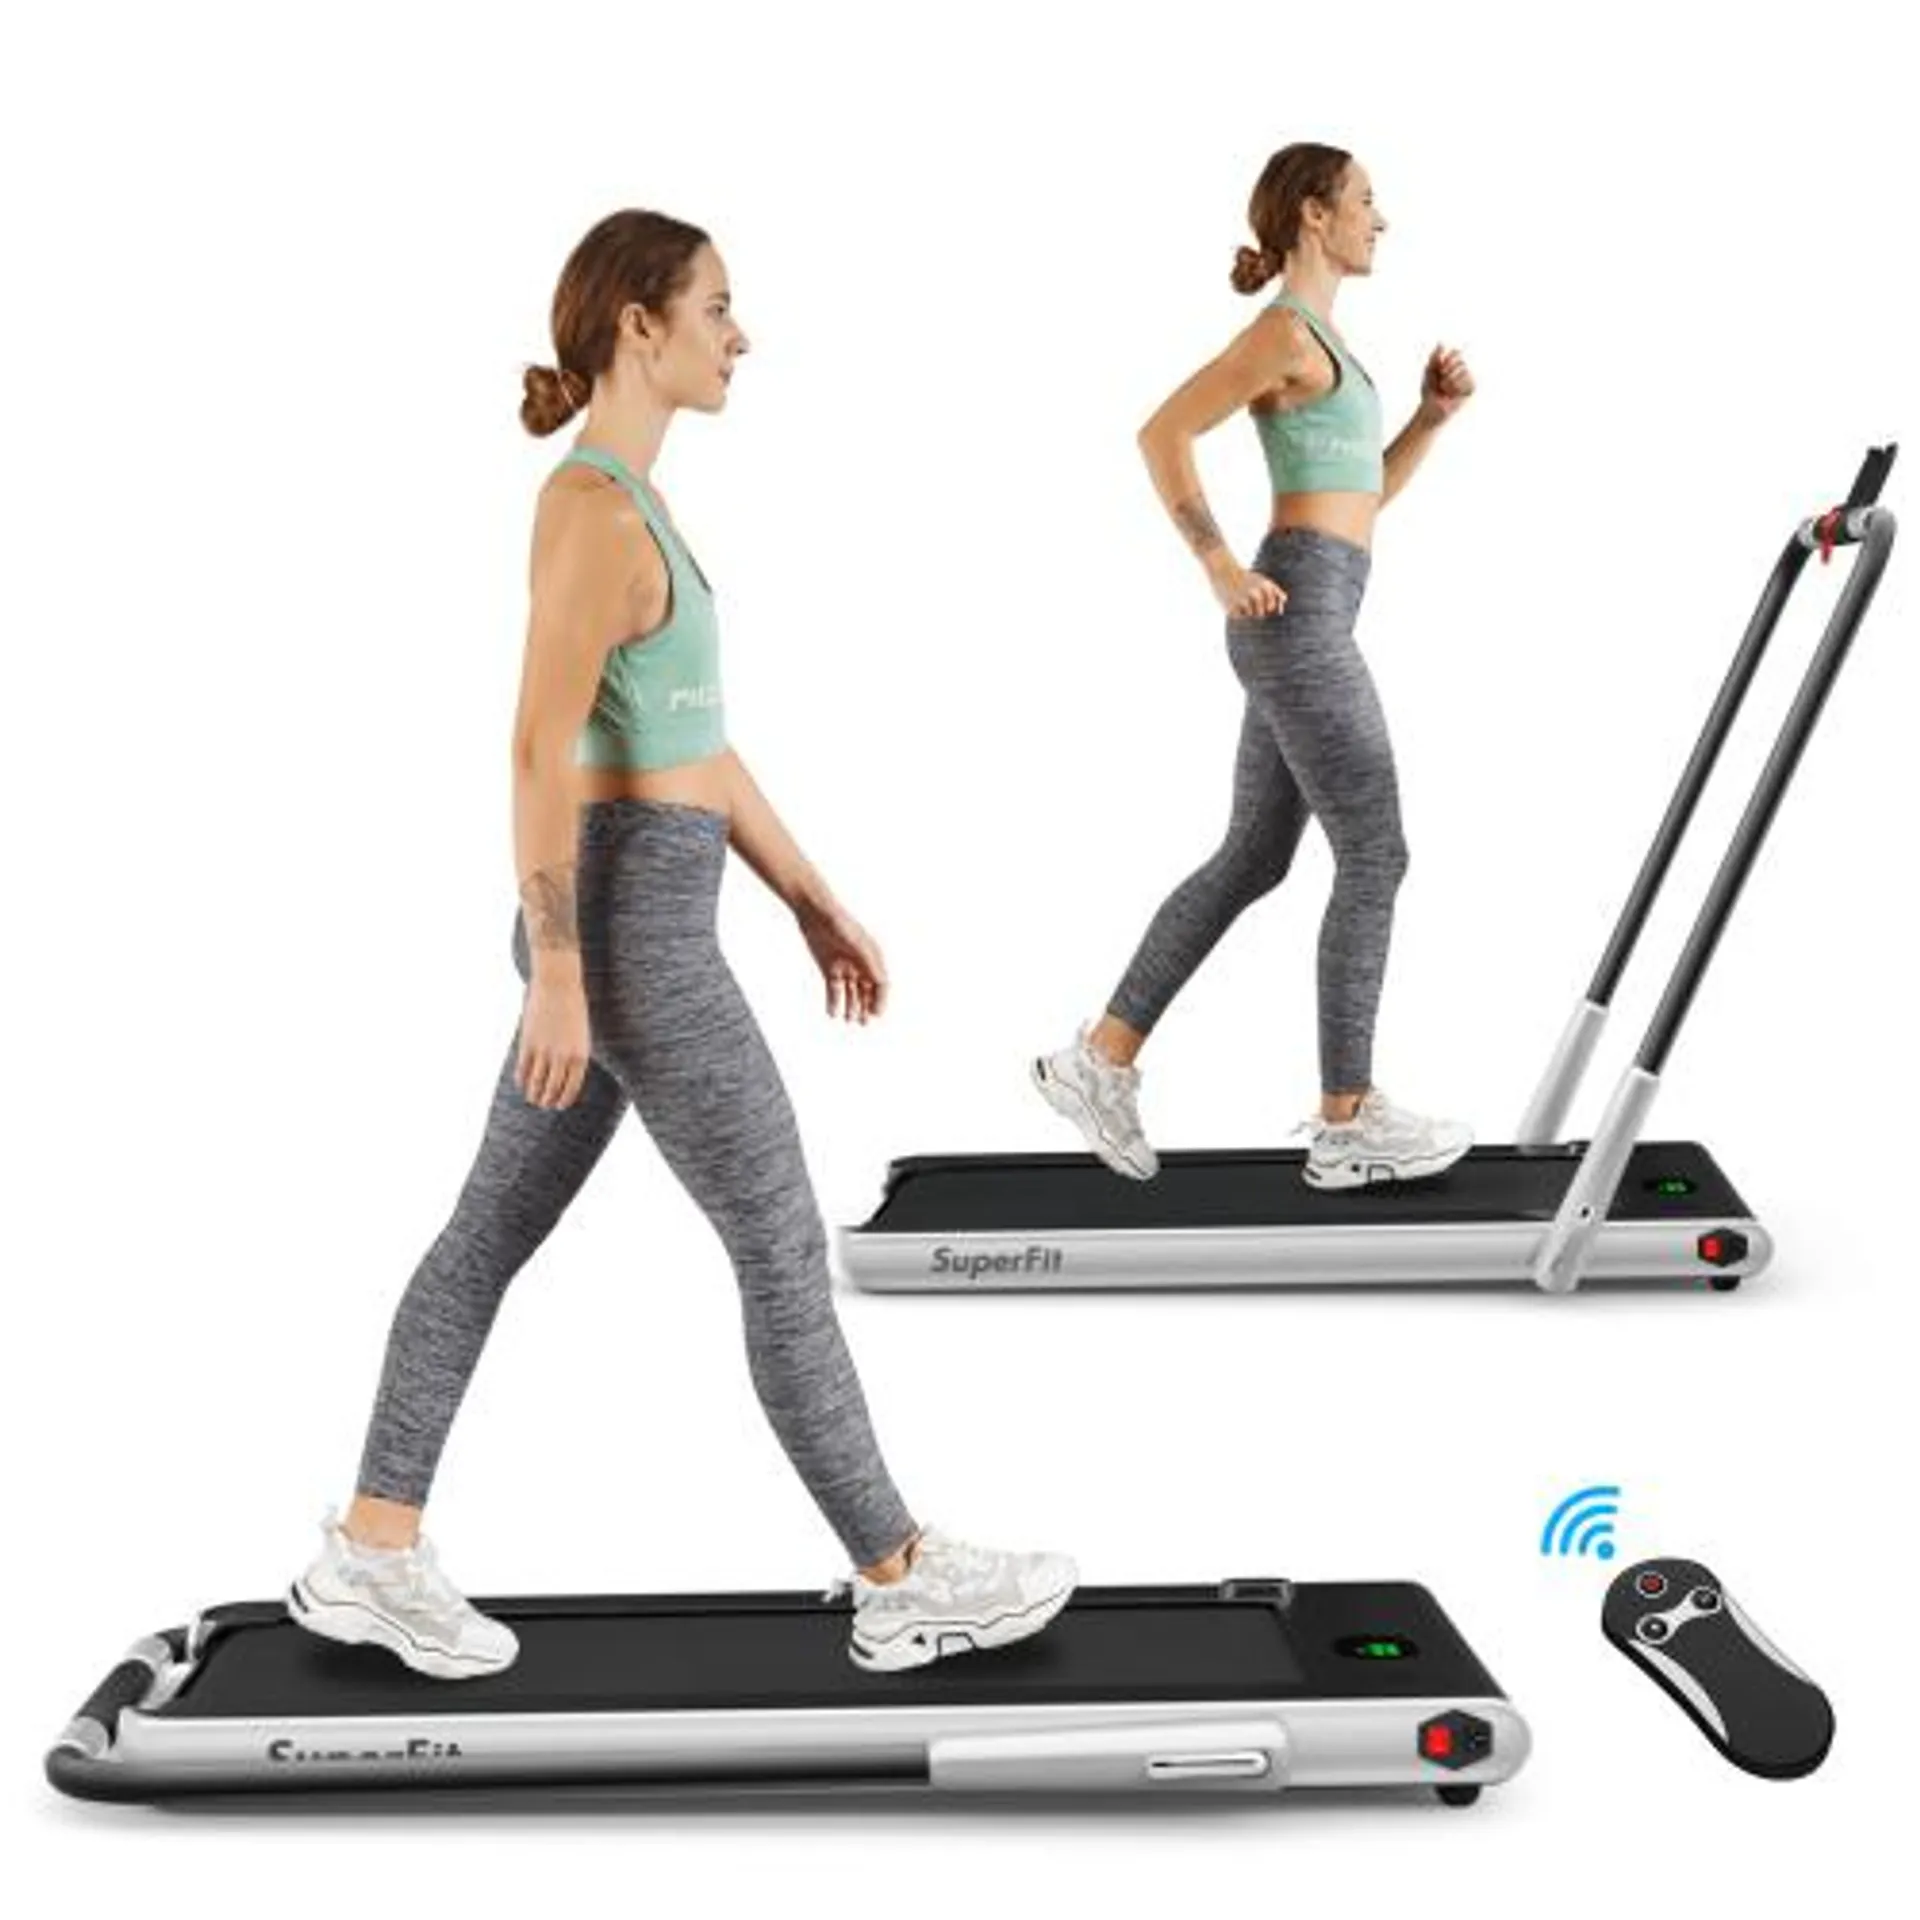 SuperFit 2.25HP 2 in 1 Folding Under Desk Treadmill / Walking Pad with Remote Control-Silver